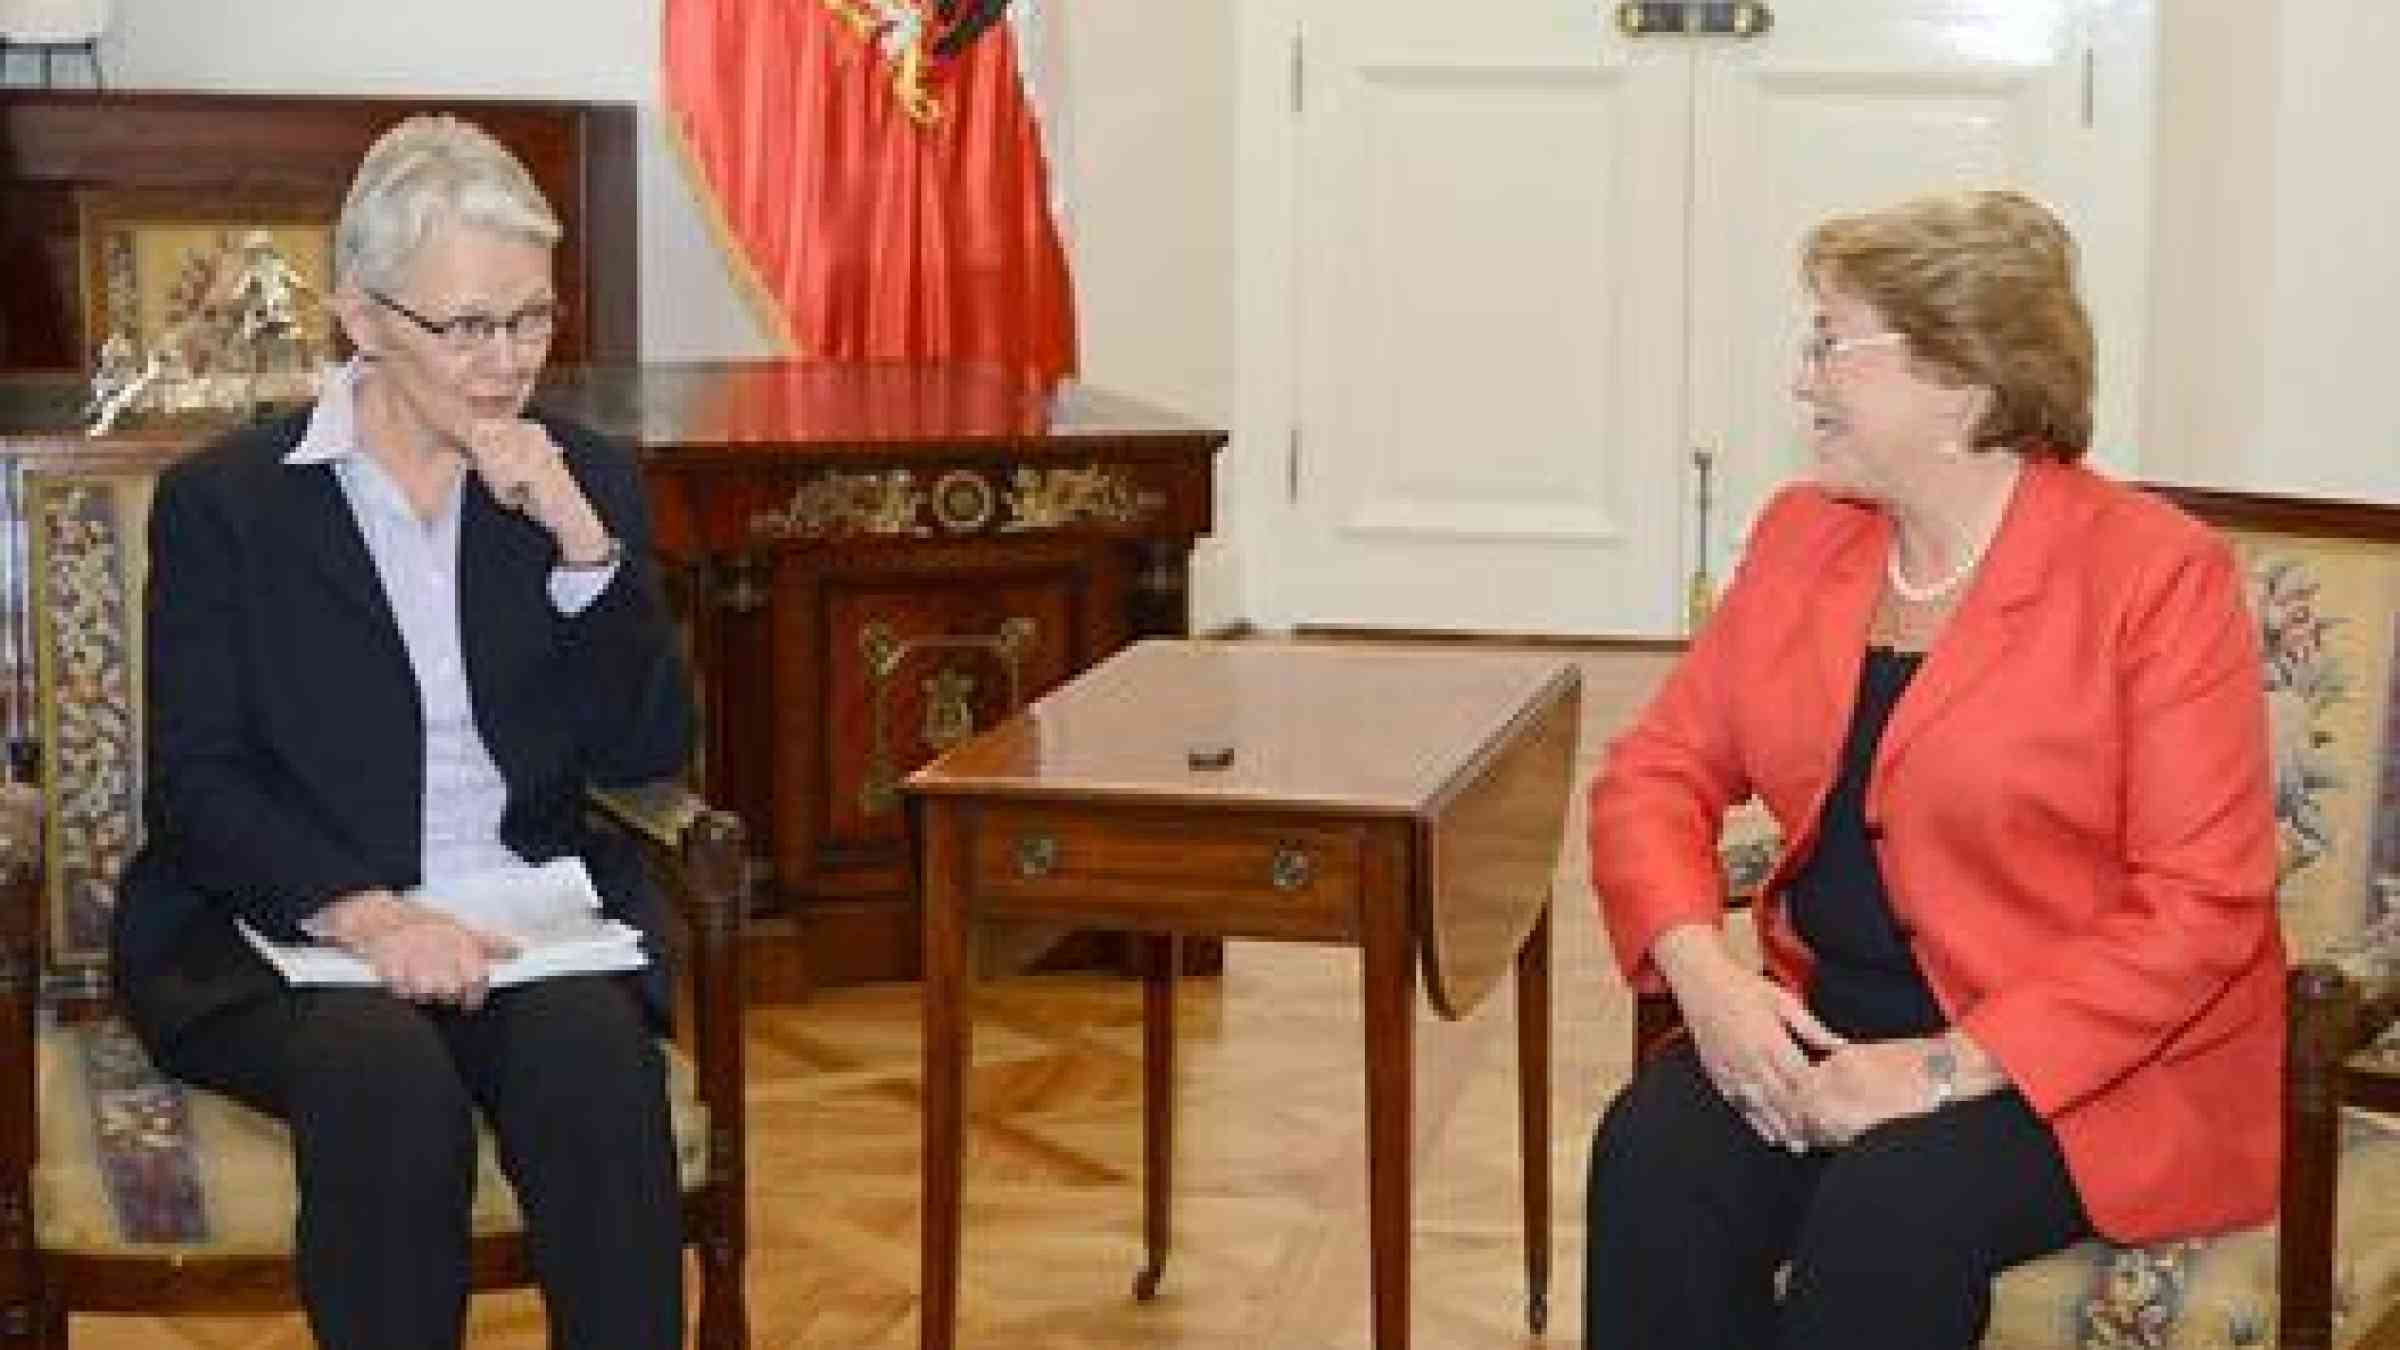 Margareta Wahlström, head of UNISDR, met with Michelle Bachelet, President of Chile, last year to discuss the country's disaster risk reduction efforts following two earthquakes (Photo: UNISDR)